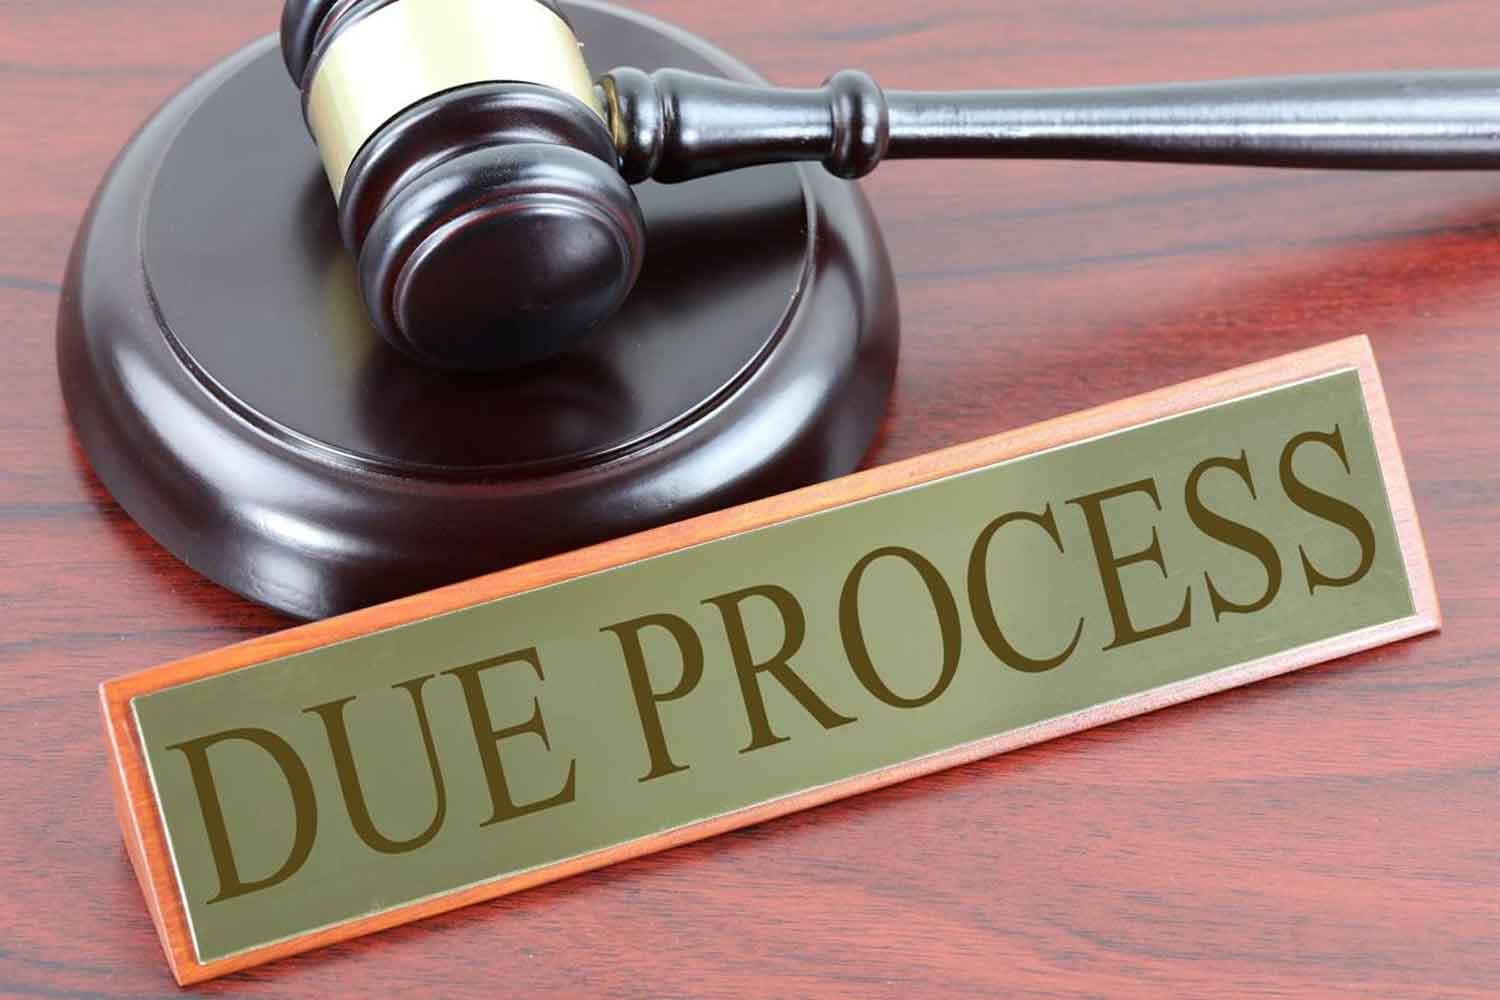 Whither the due process mechanism?